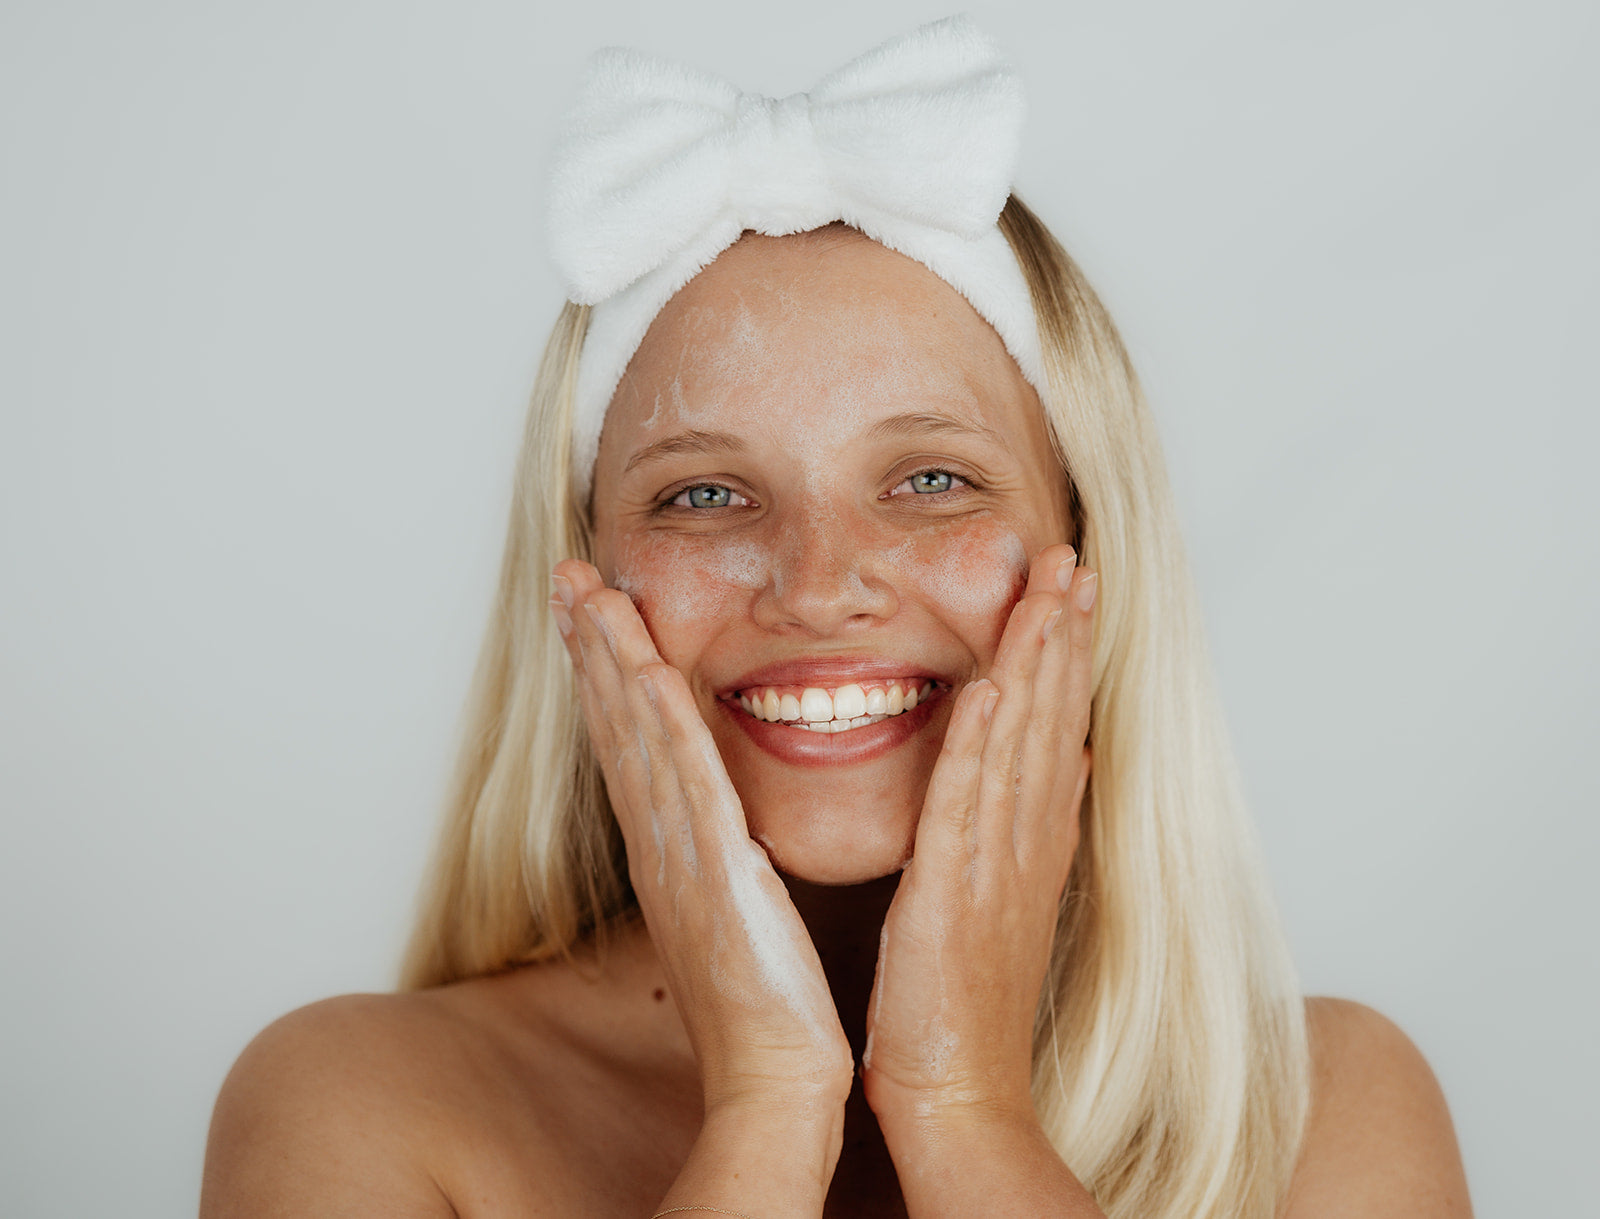 girl wearing fluffy ks headband for skincare routine - faq's frequently asked questions for kindred skincare woman all skin types australian brand